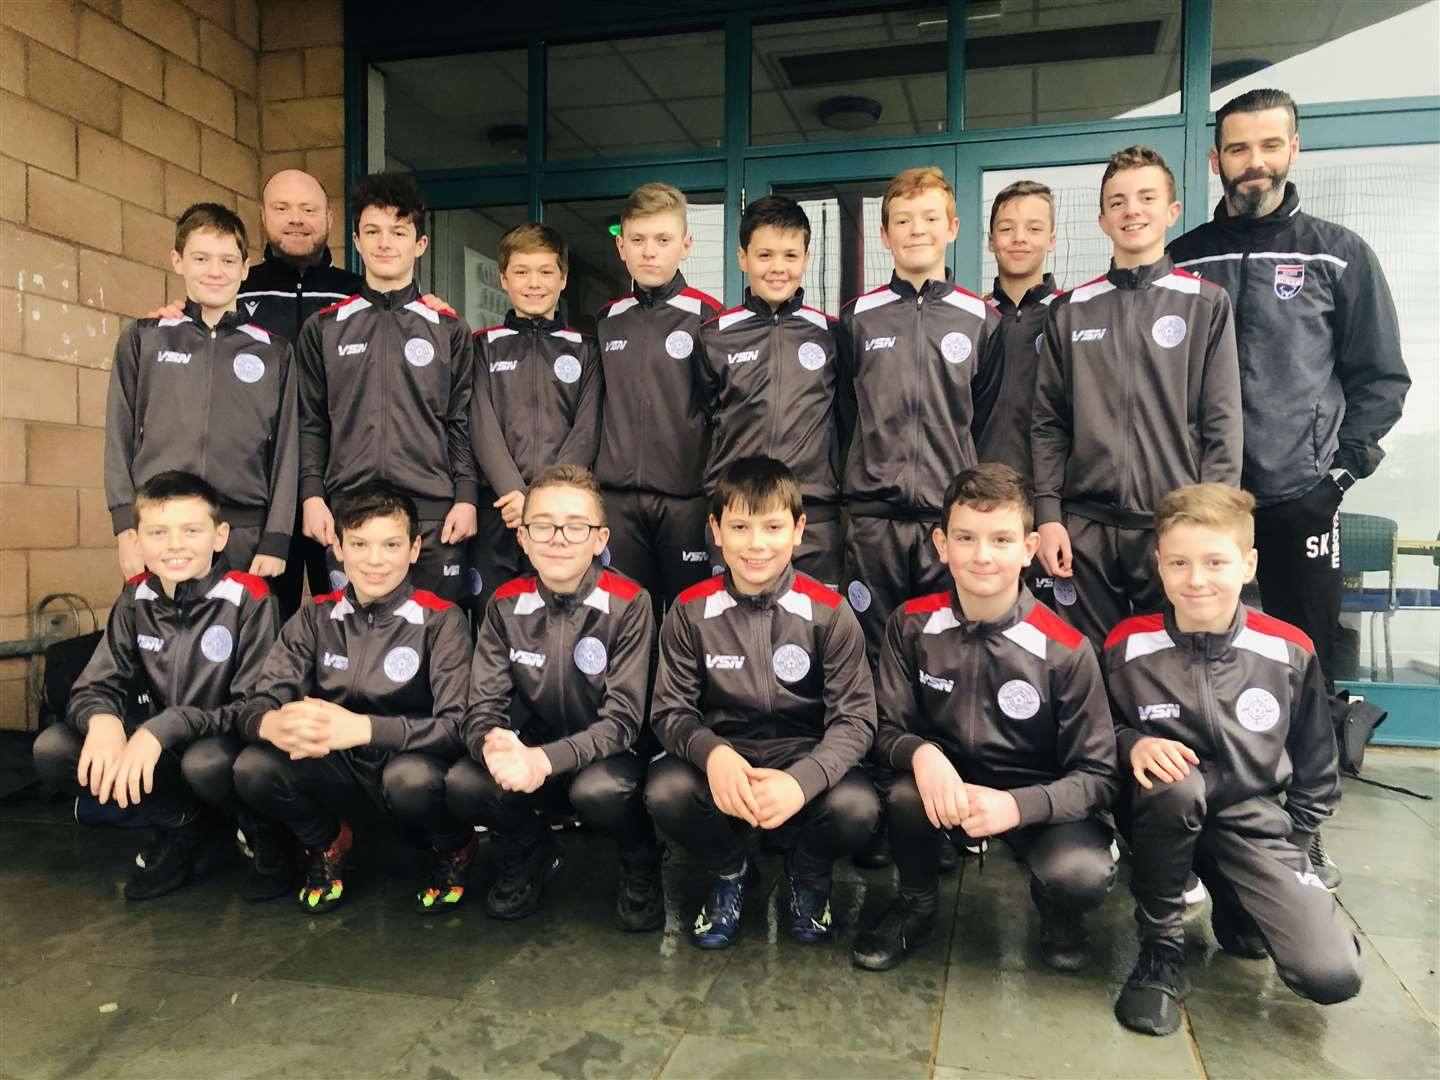 The Caithness United under-13s with Ross County co-managers Steven Ferguson and Stuart Kettlewell.